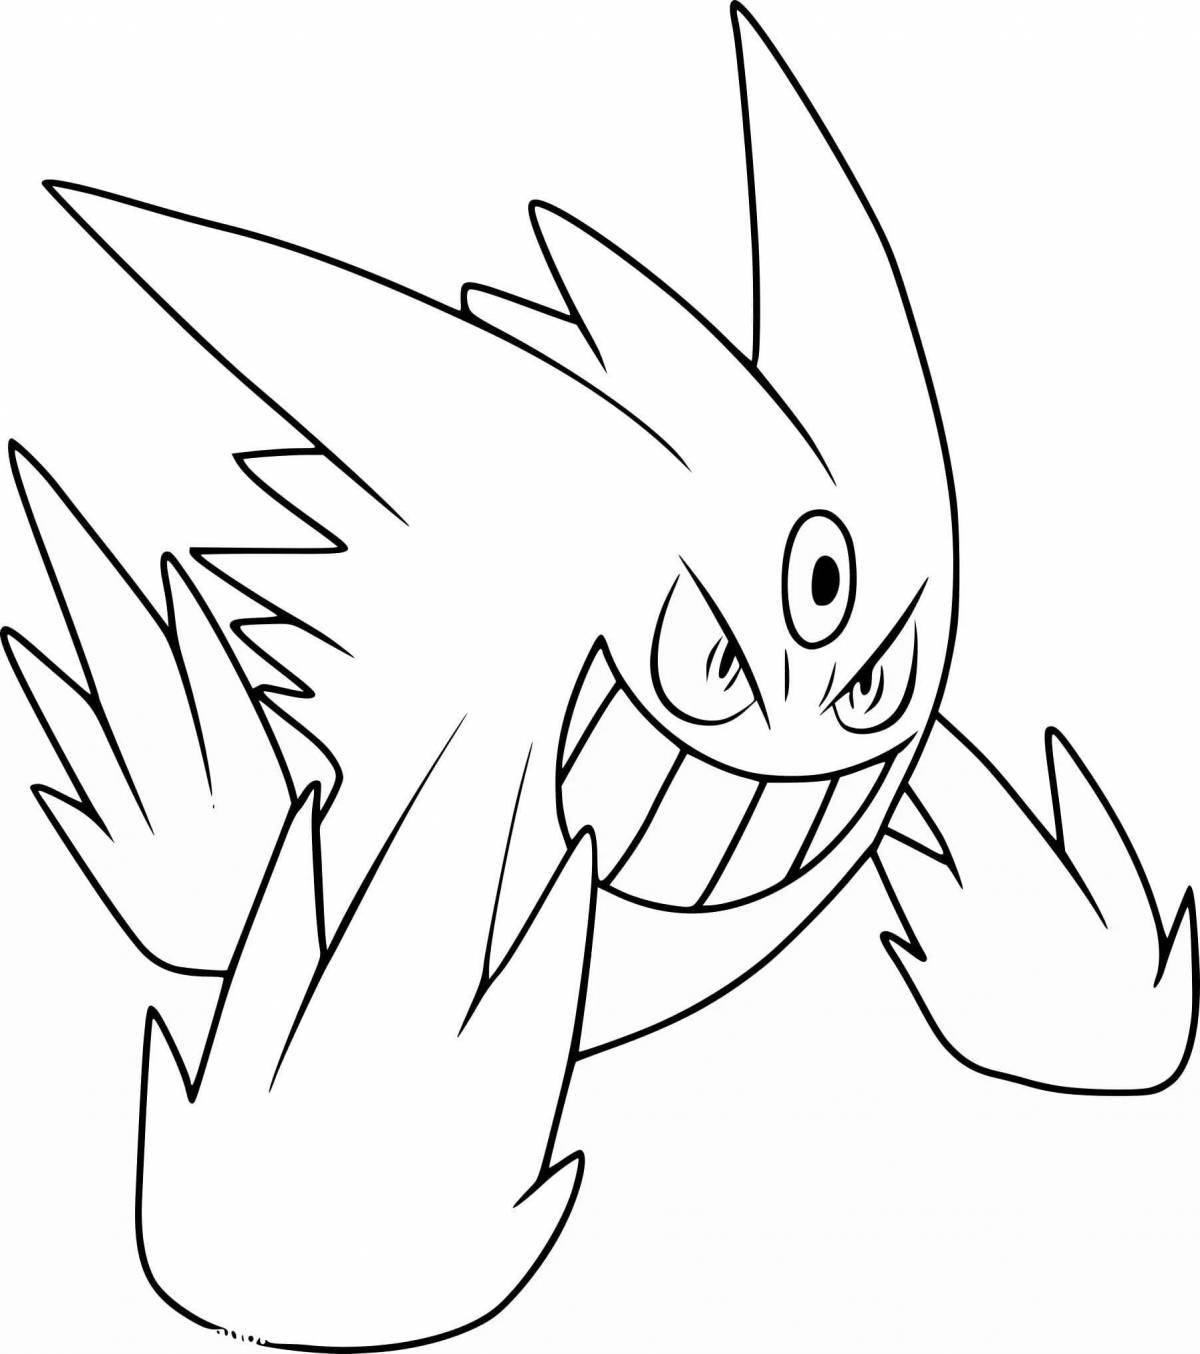 Colouring funny gengar